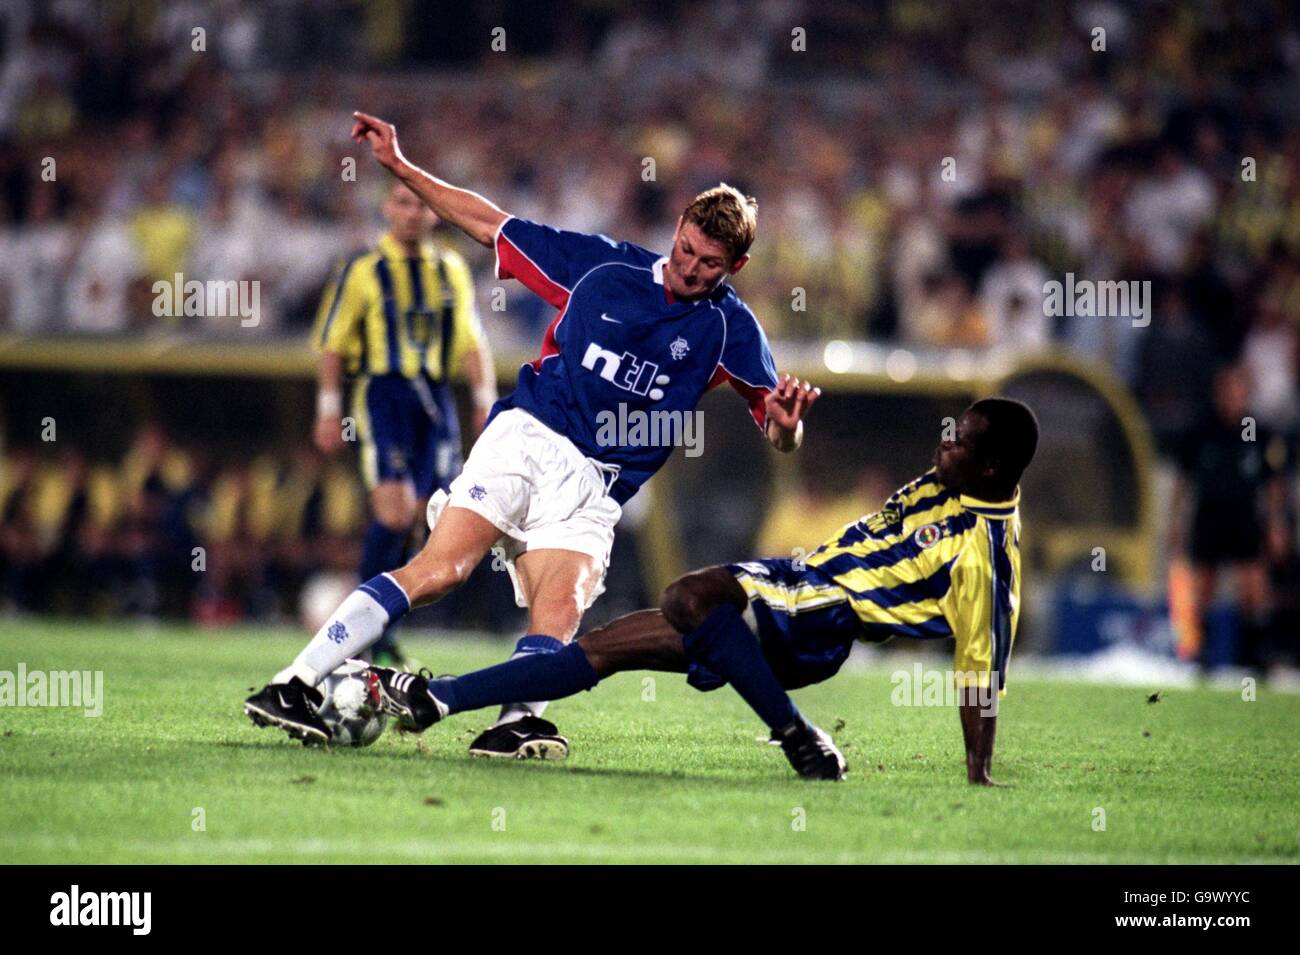 Soccer - UEFA Champions League - Third Qualifying Round Second Leg - Fenerbahce v Rangers. Fenerbahce's Samuel Johnson (r) tackles Rangers' Tore Andre Flo (l) Stock Photo